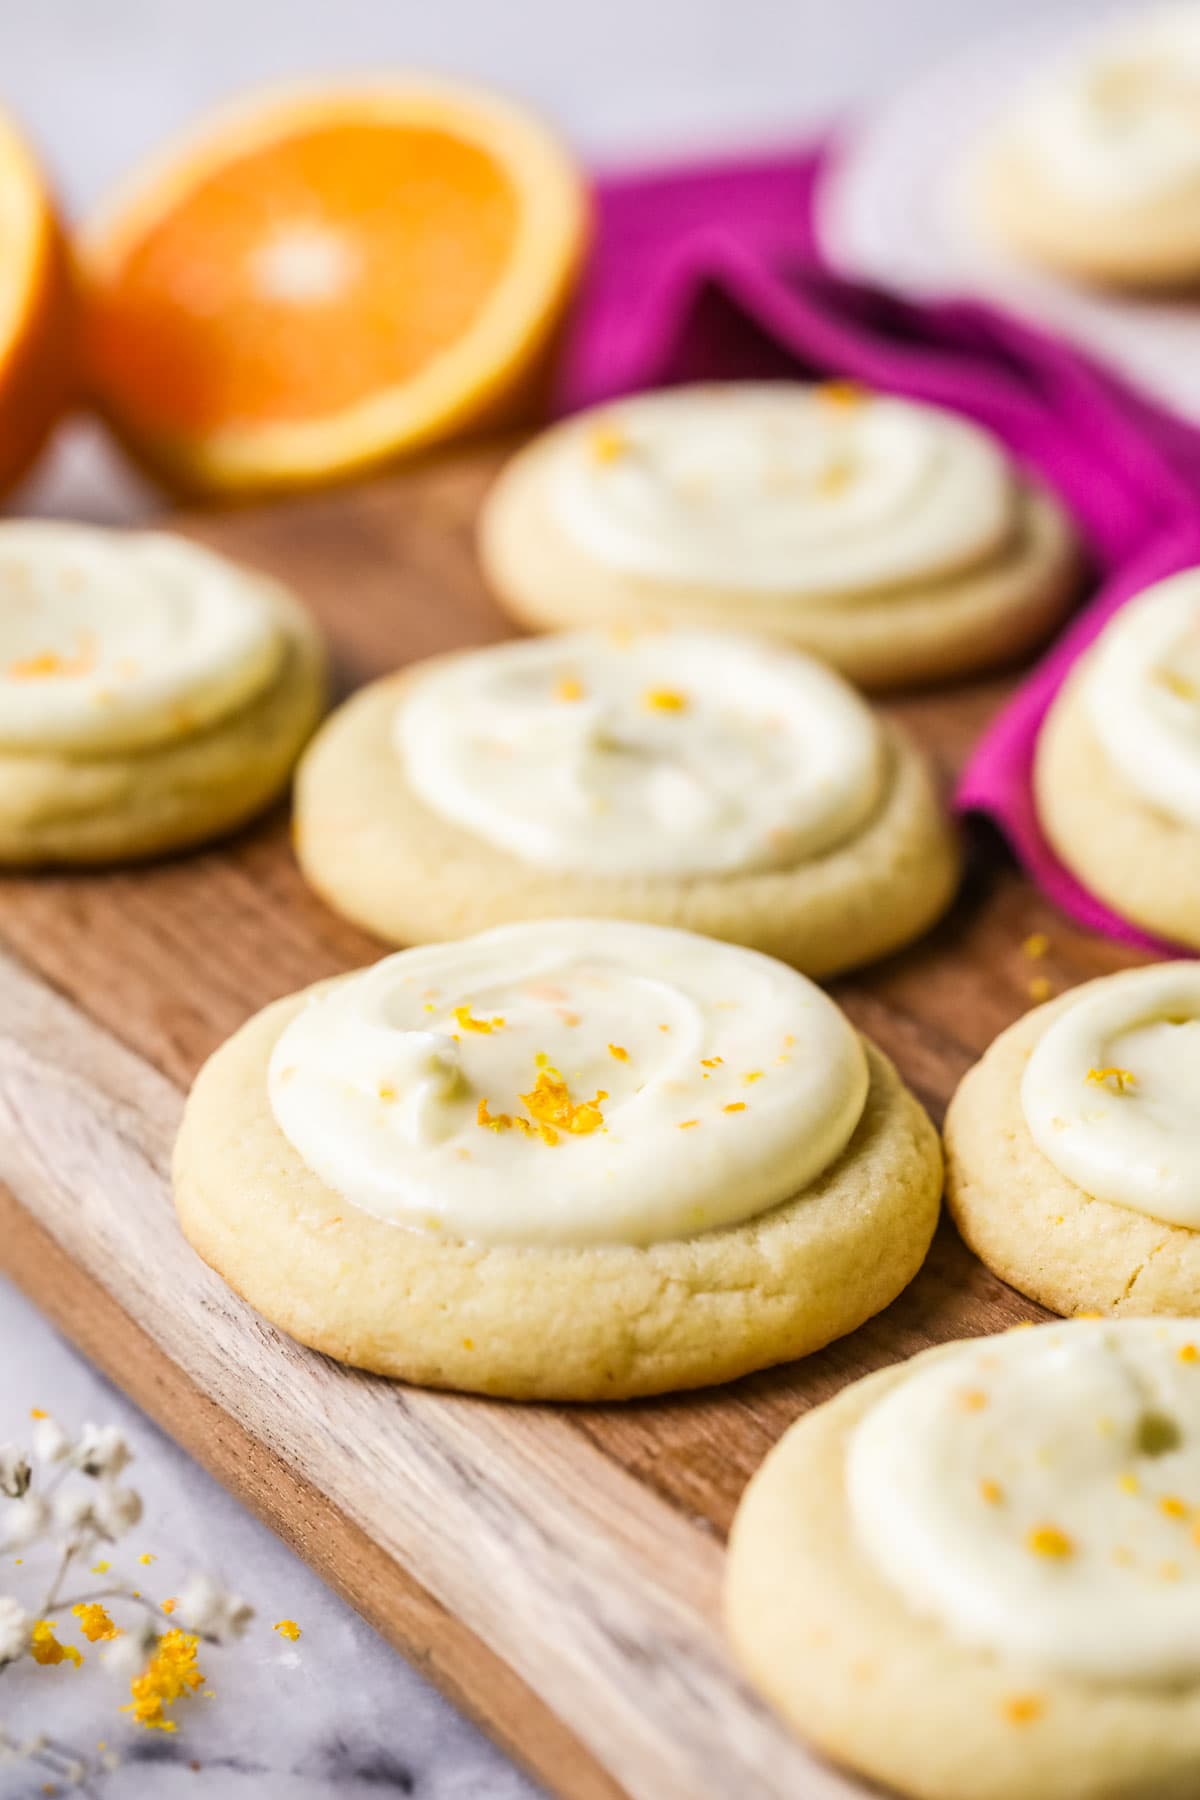 Orange flavored cookies topped with frosting and fresh orange zest on a wood cutting board.